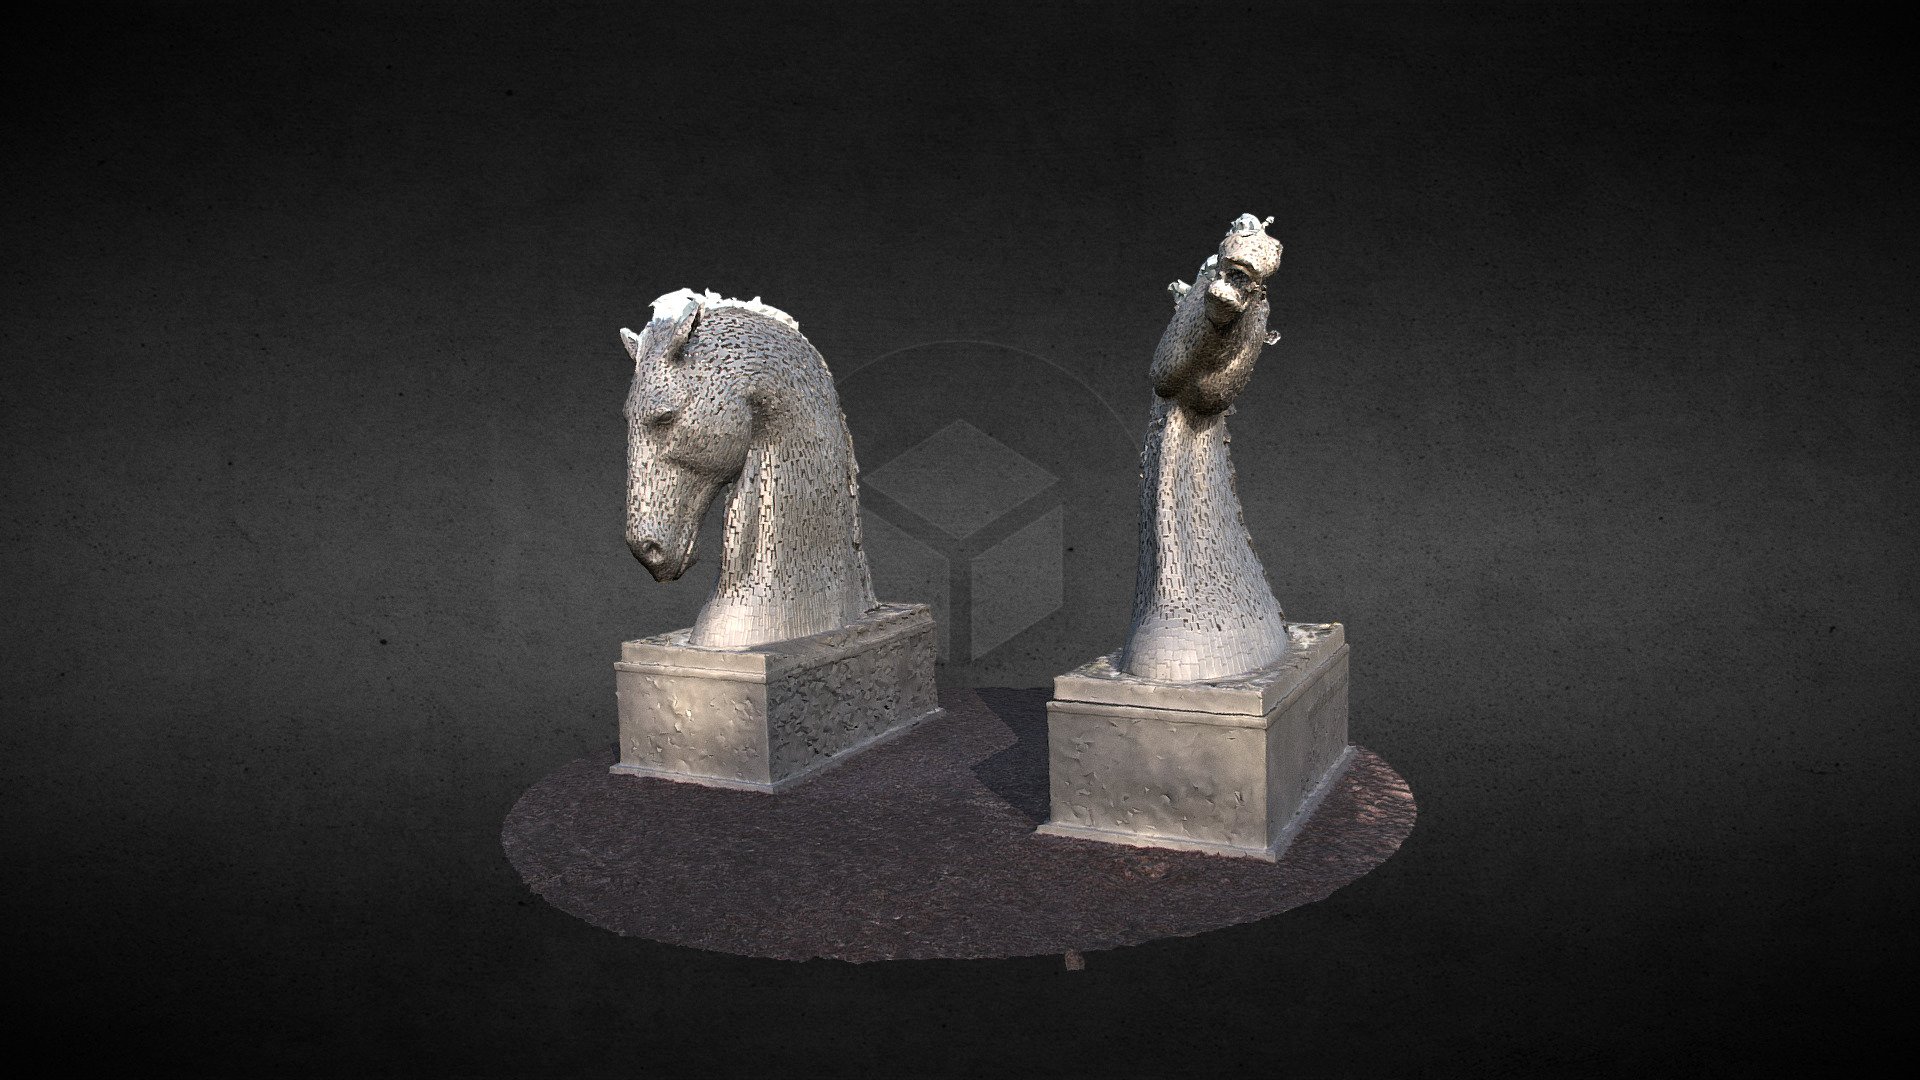 Kelpie maquettes - Kelpies Day (PhotoScan) - 3D model by Brian Mather (@brian.mather) 3d model